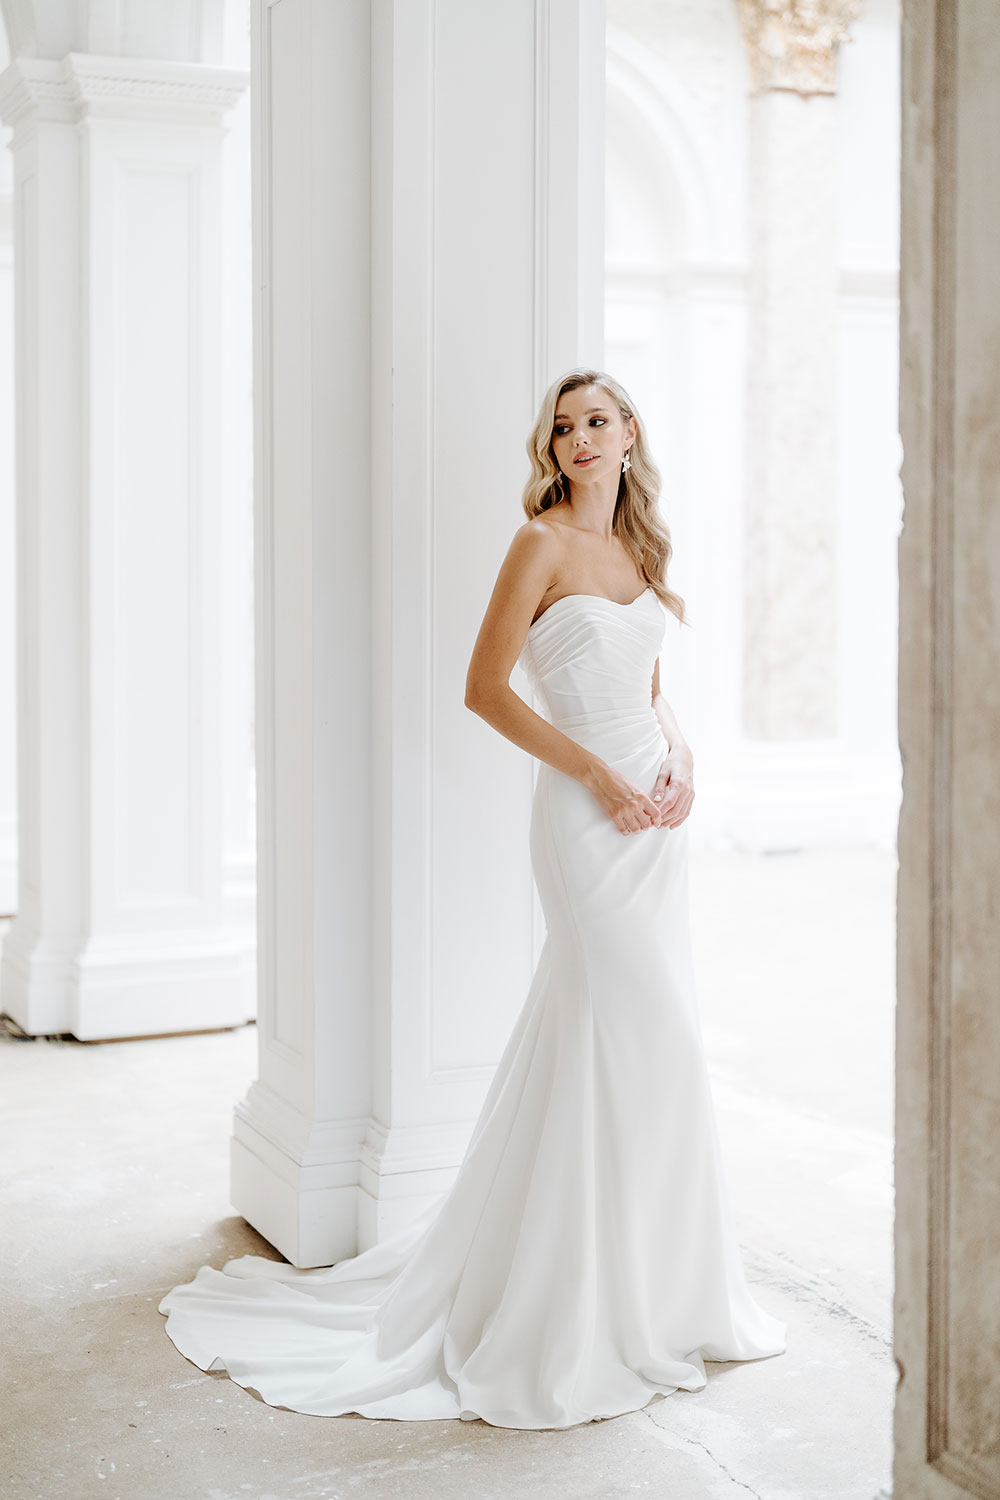 Rosewood wedding dress by Suzanne Neville